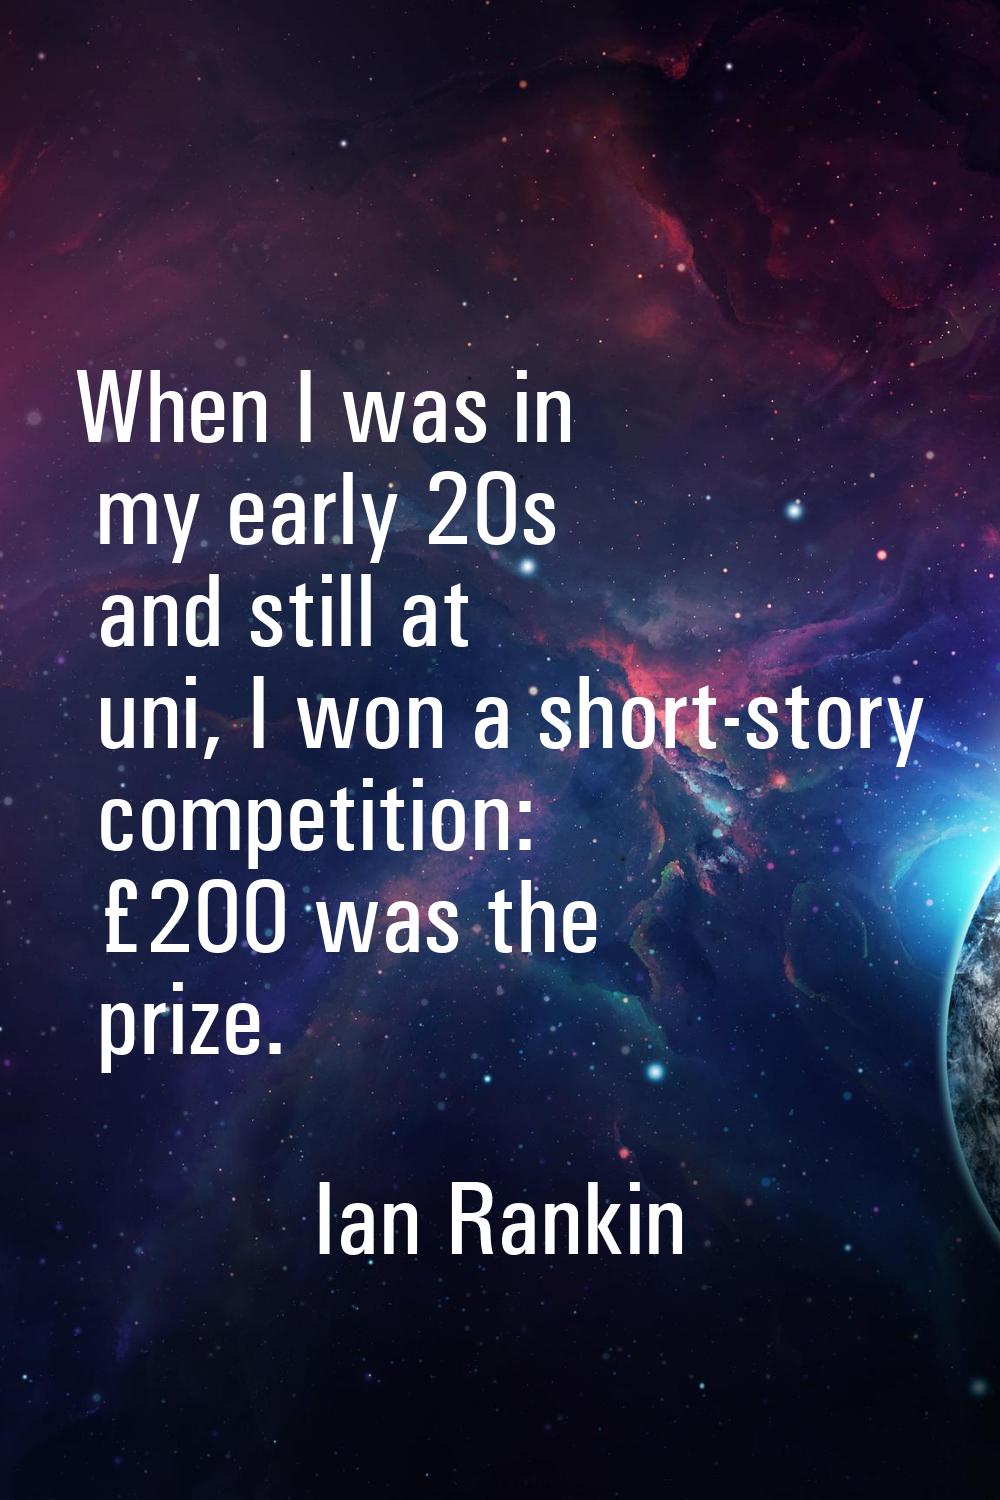 When I was in my early 20s and still at uni, I won a short-story competition: £200 was the prize.